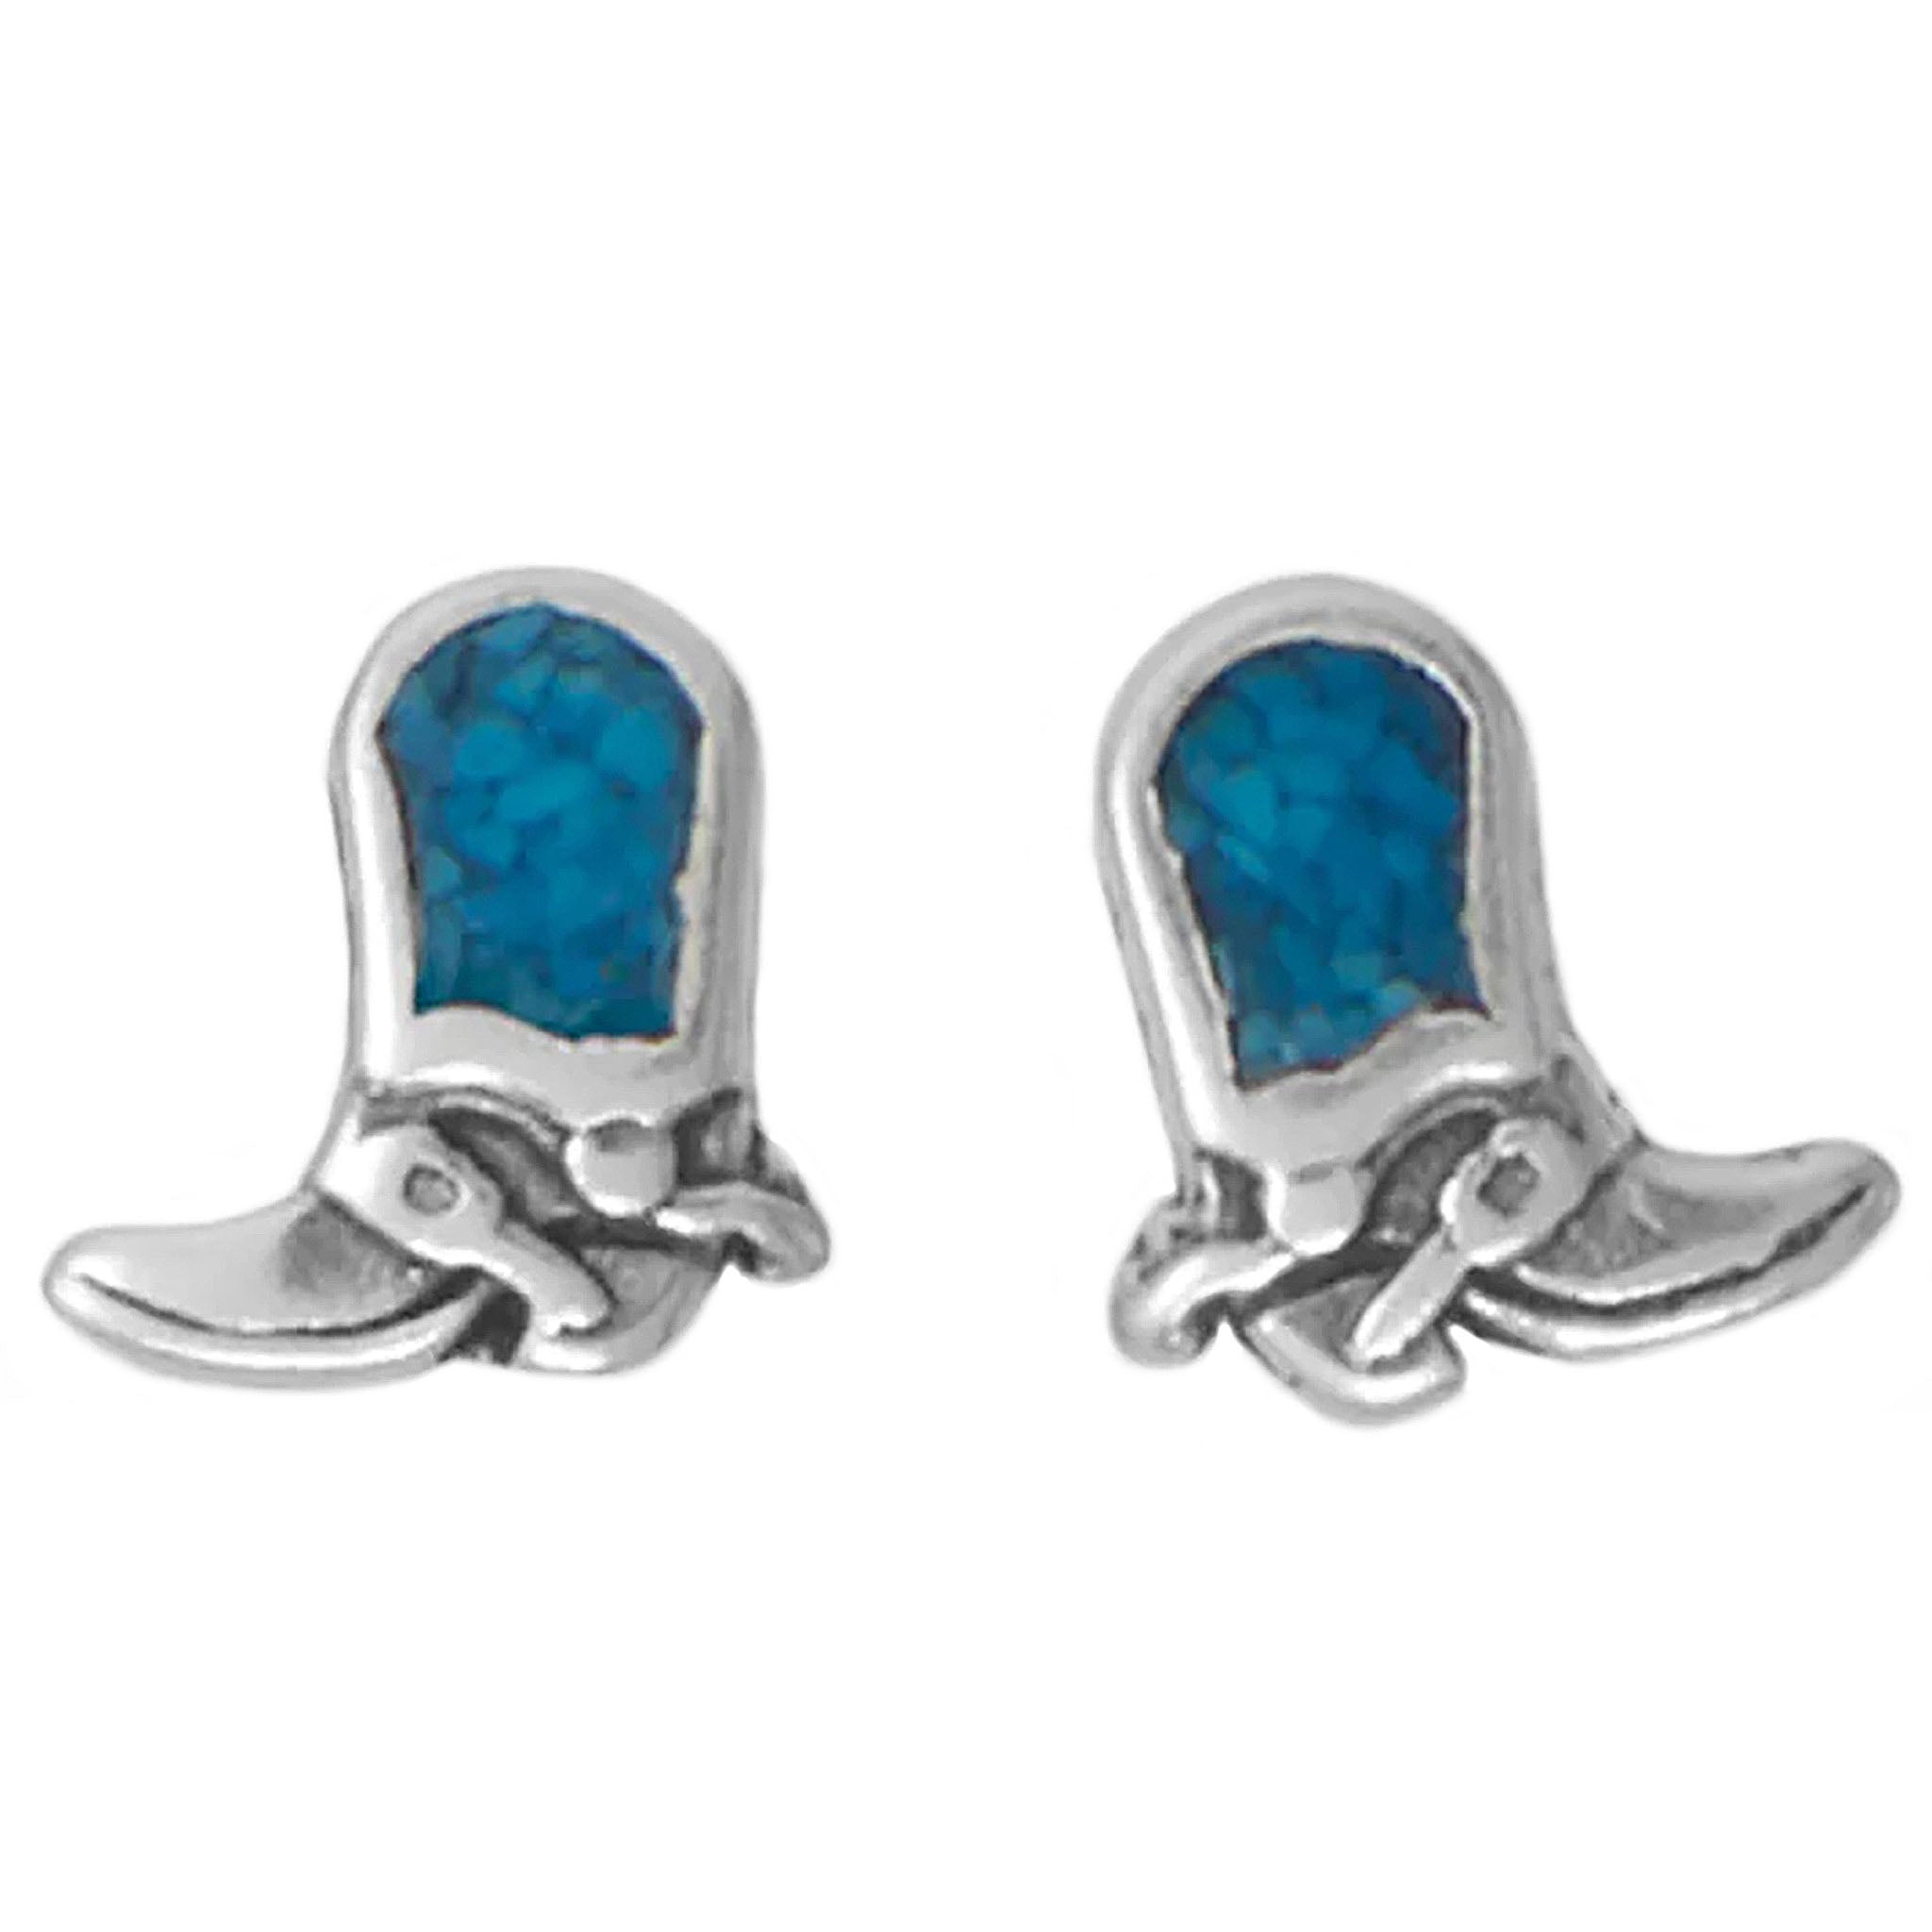 Turquoise Chip Cowgirl Boot Earrings